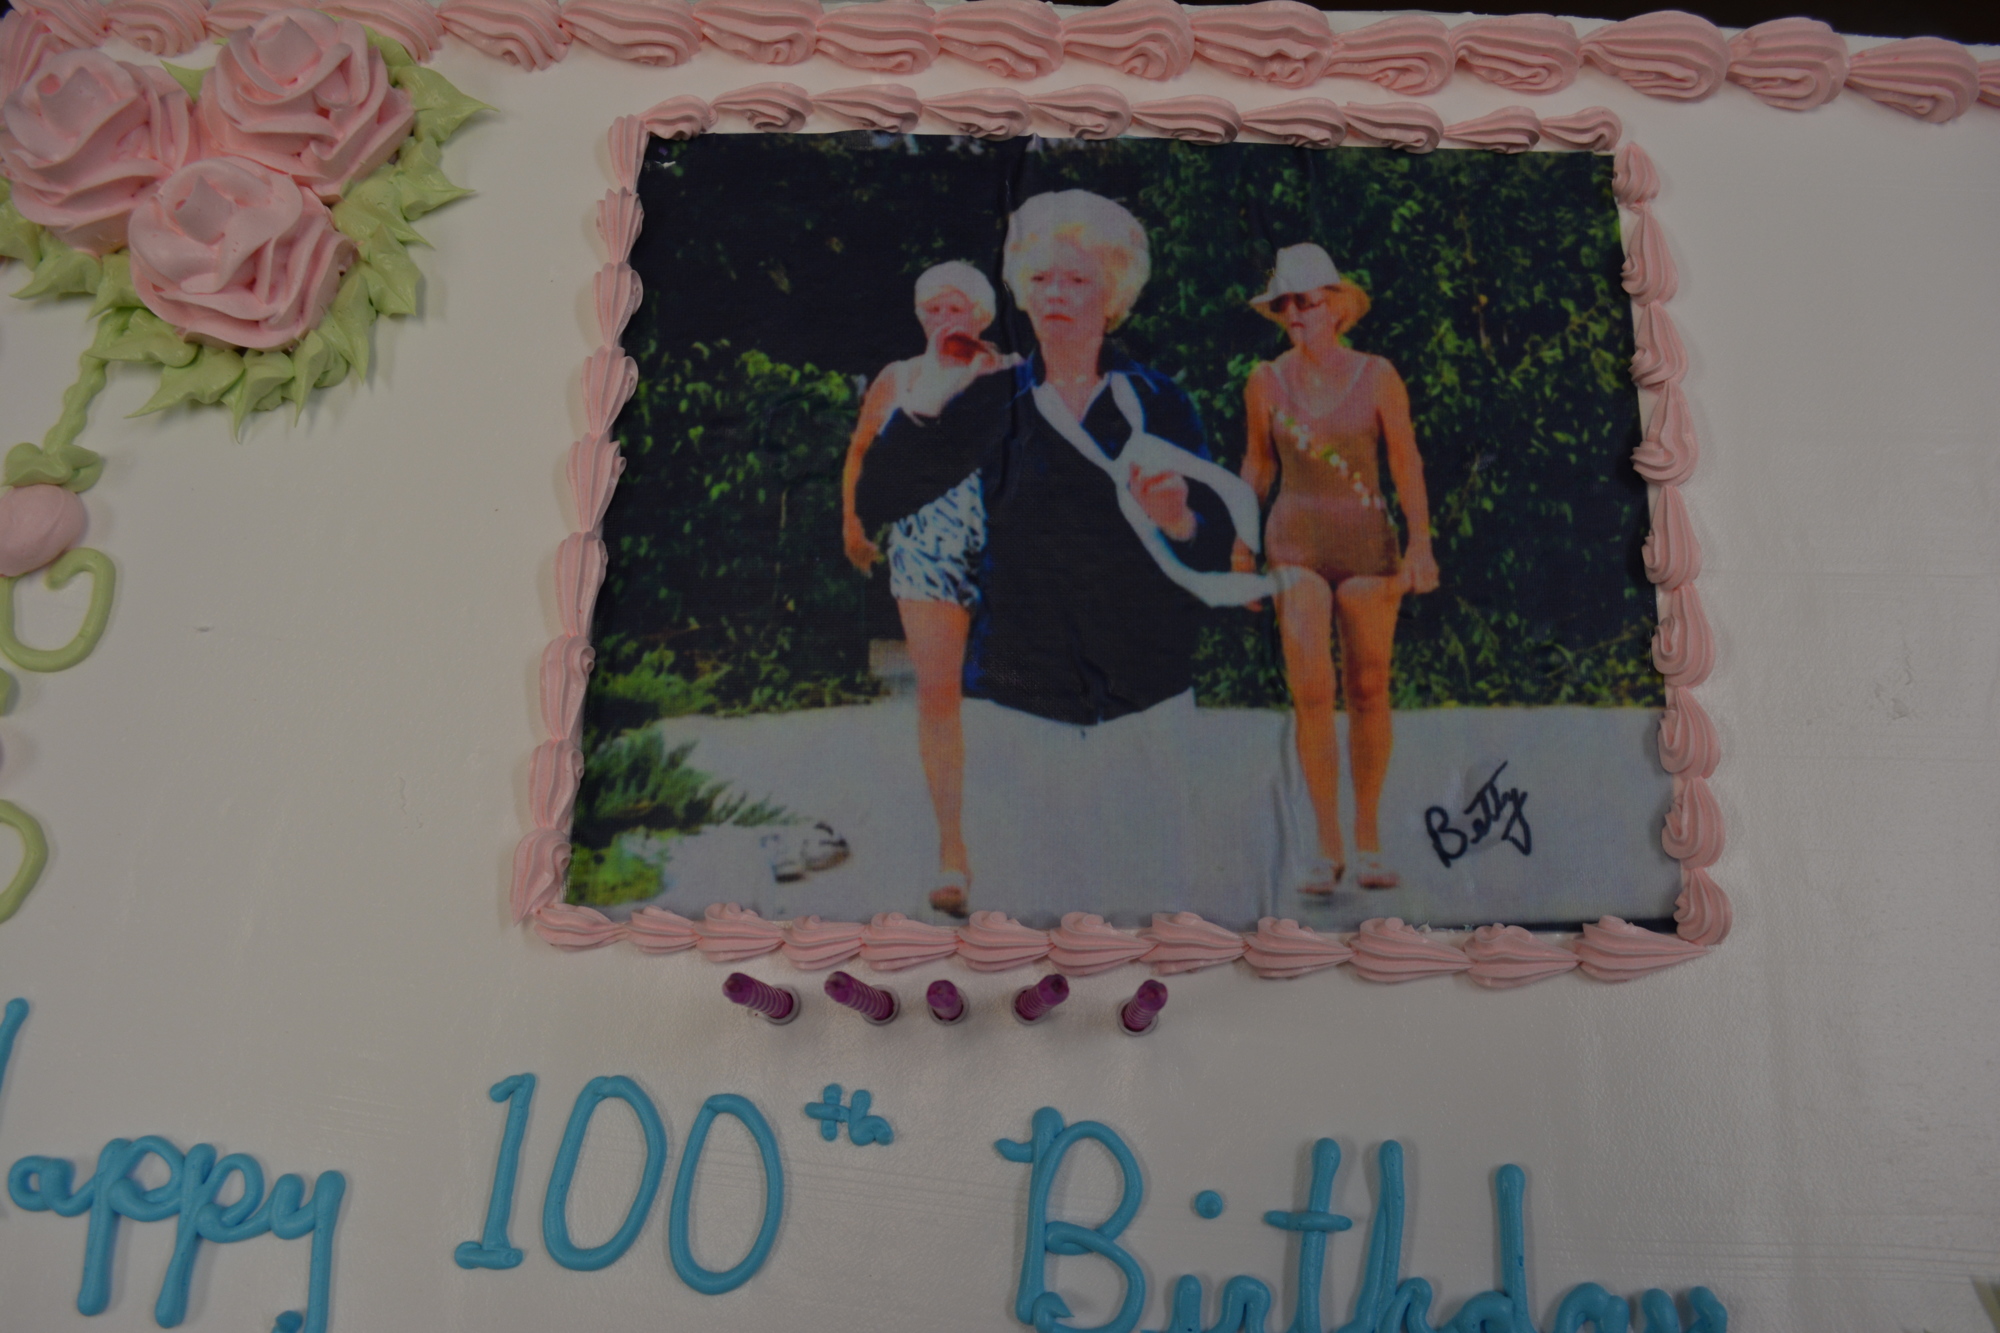 Betty Andreone's 100th birthday celebration cake included a picture of her appearance in 